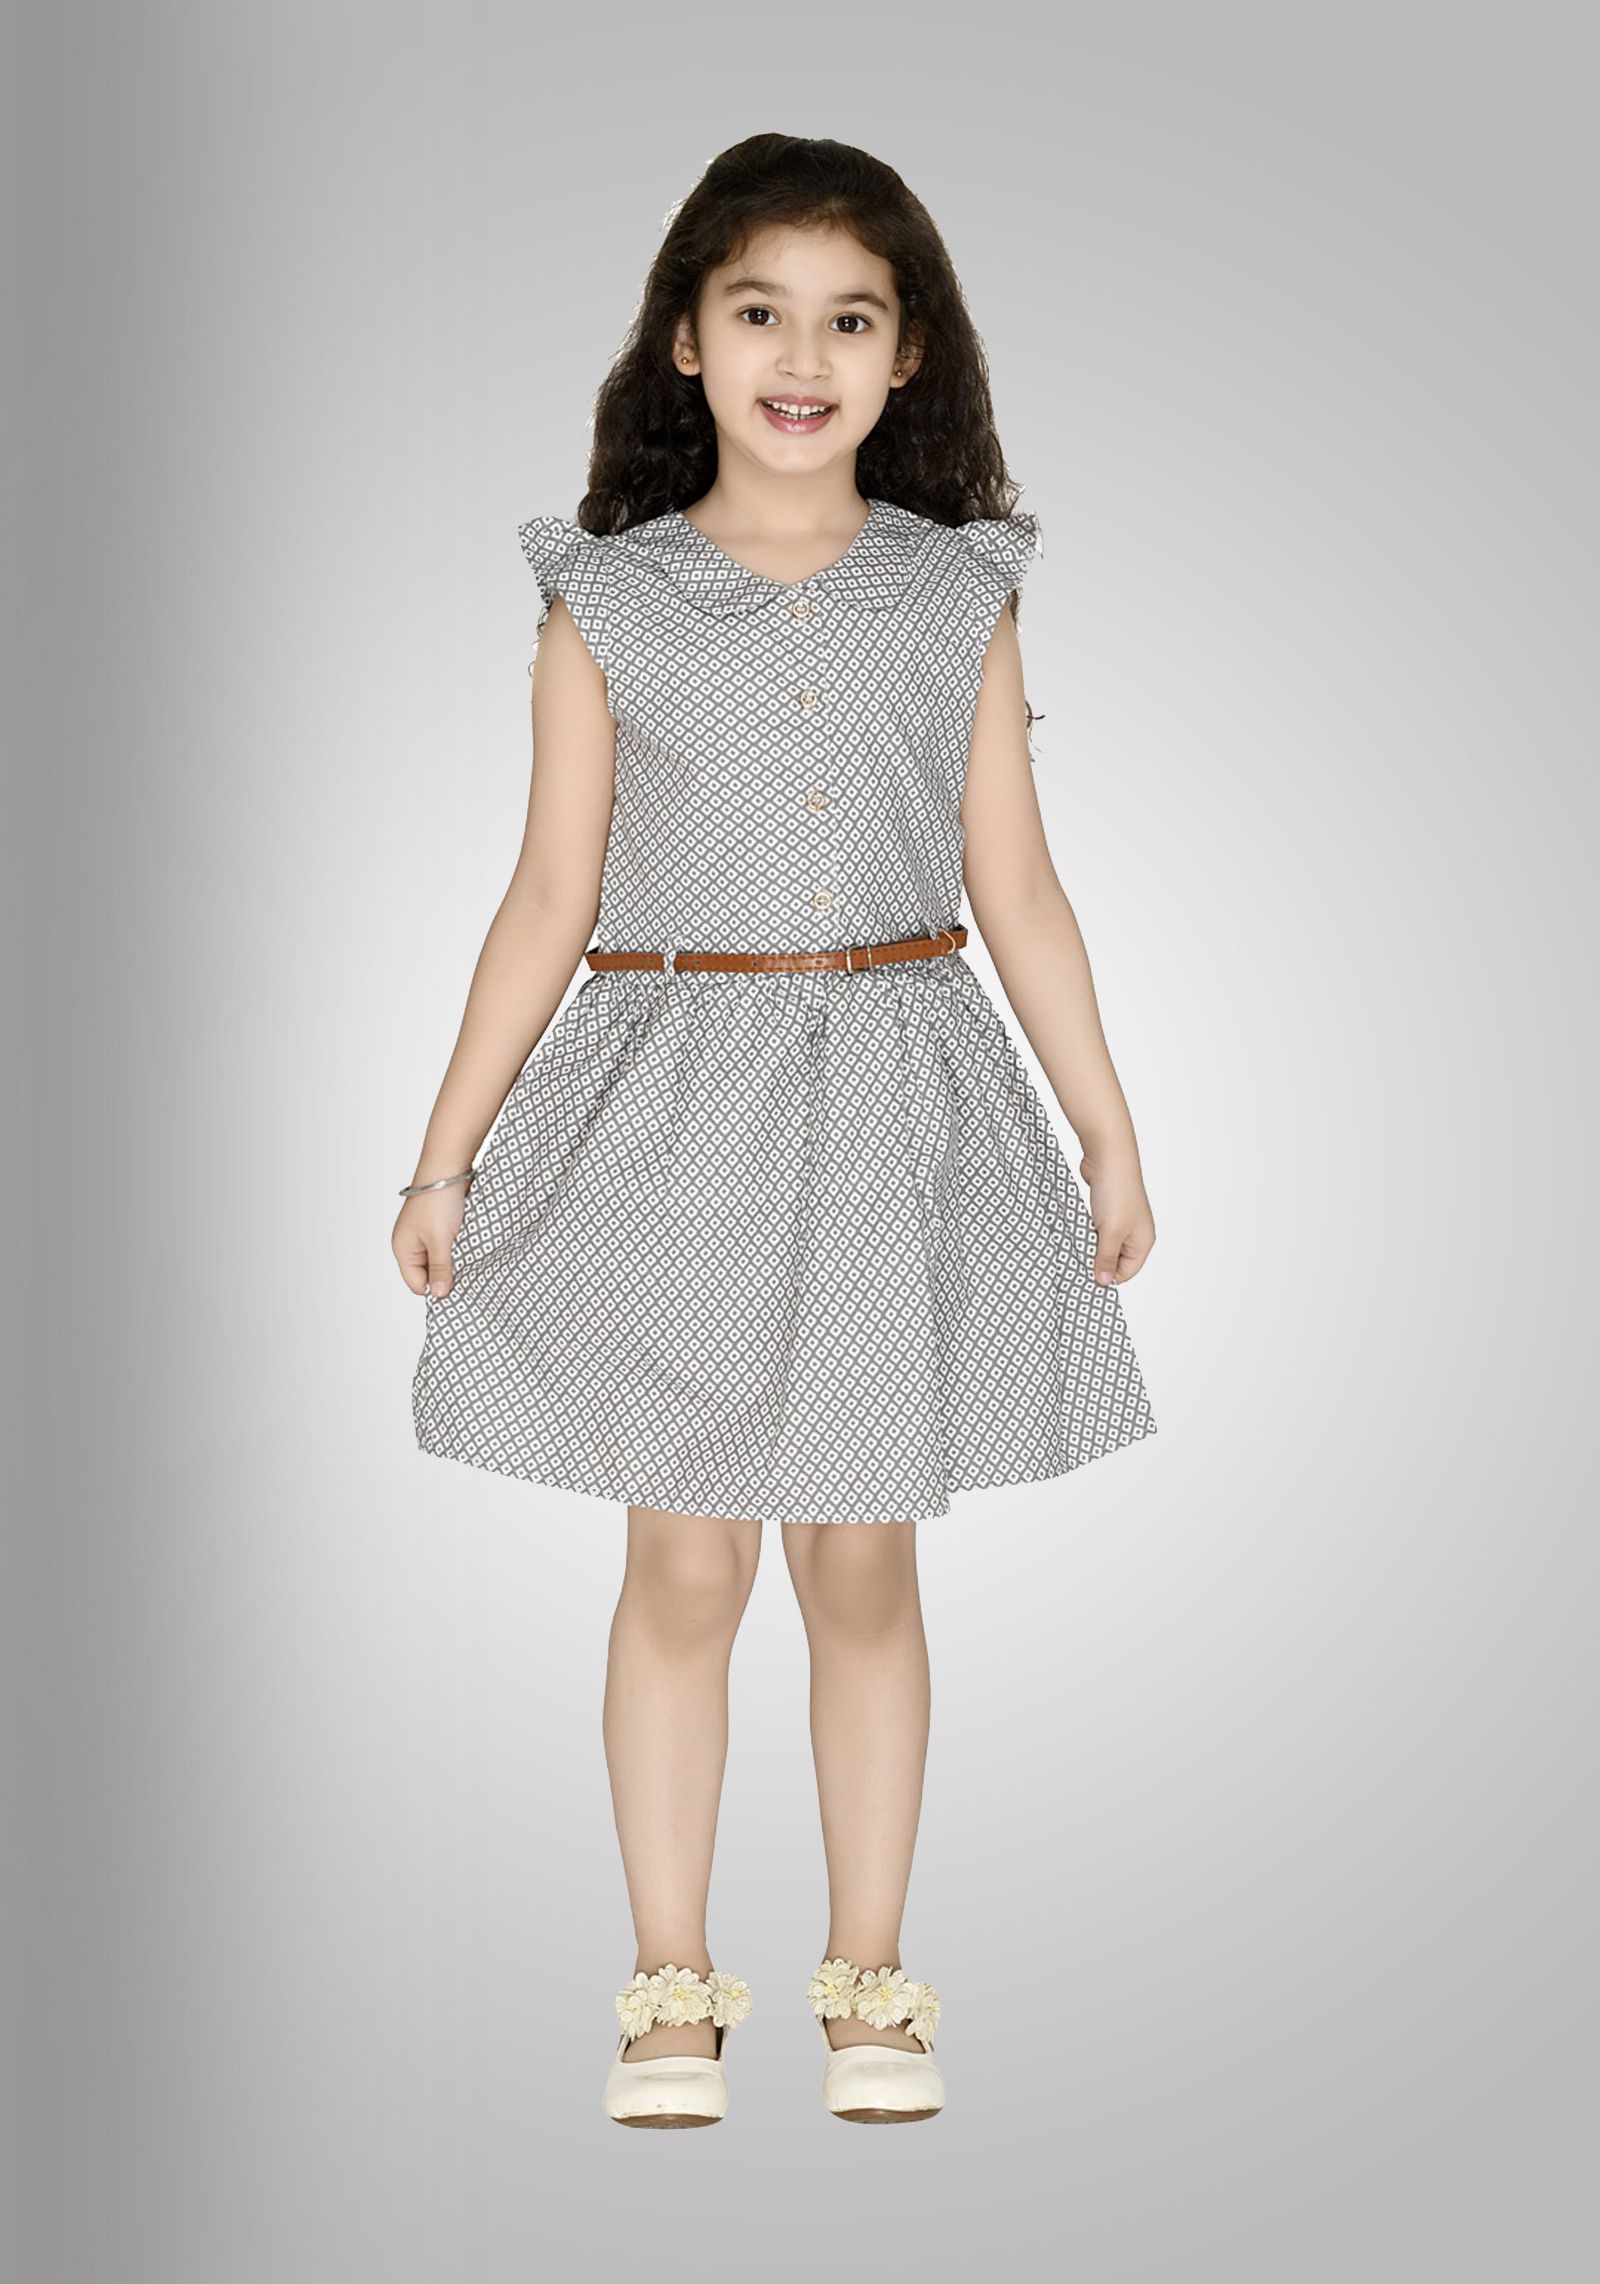     			Arshia Fashions - Gray Cotton Blend Girls A-line Dress ( Pack of 1 )